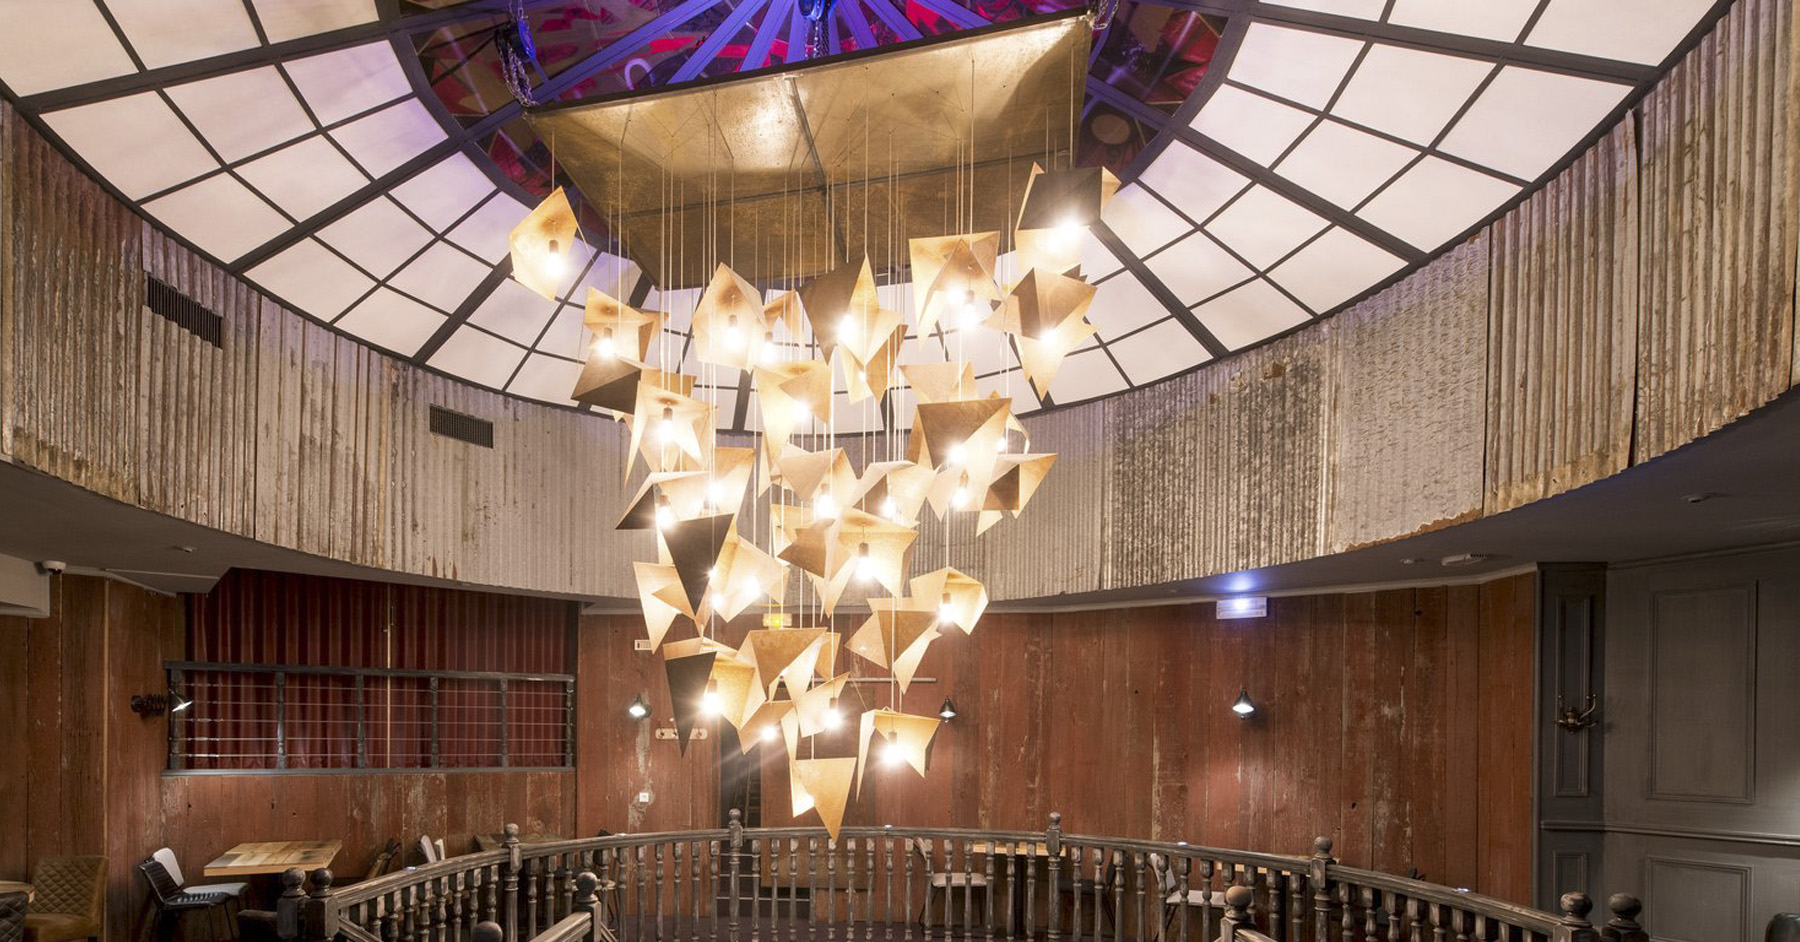 Gie El’s Avant-Garde Chandeliers: The Perfect Addition to Any Hotel